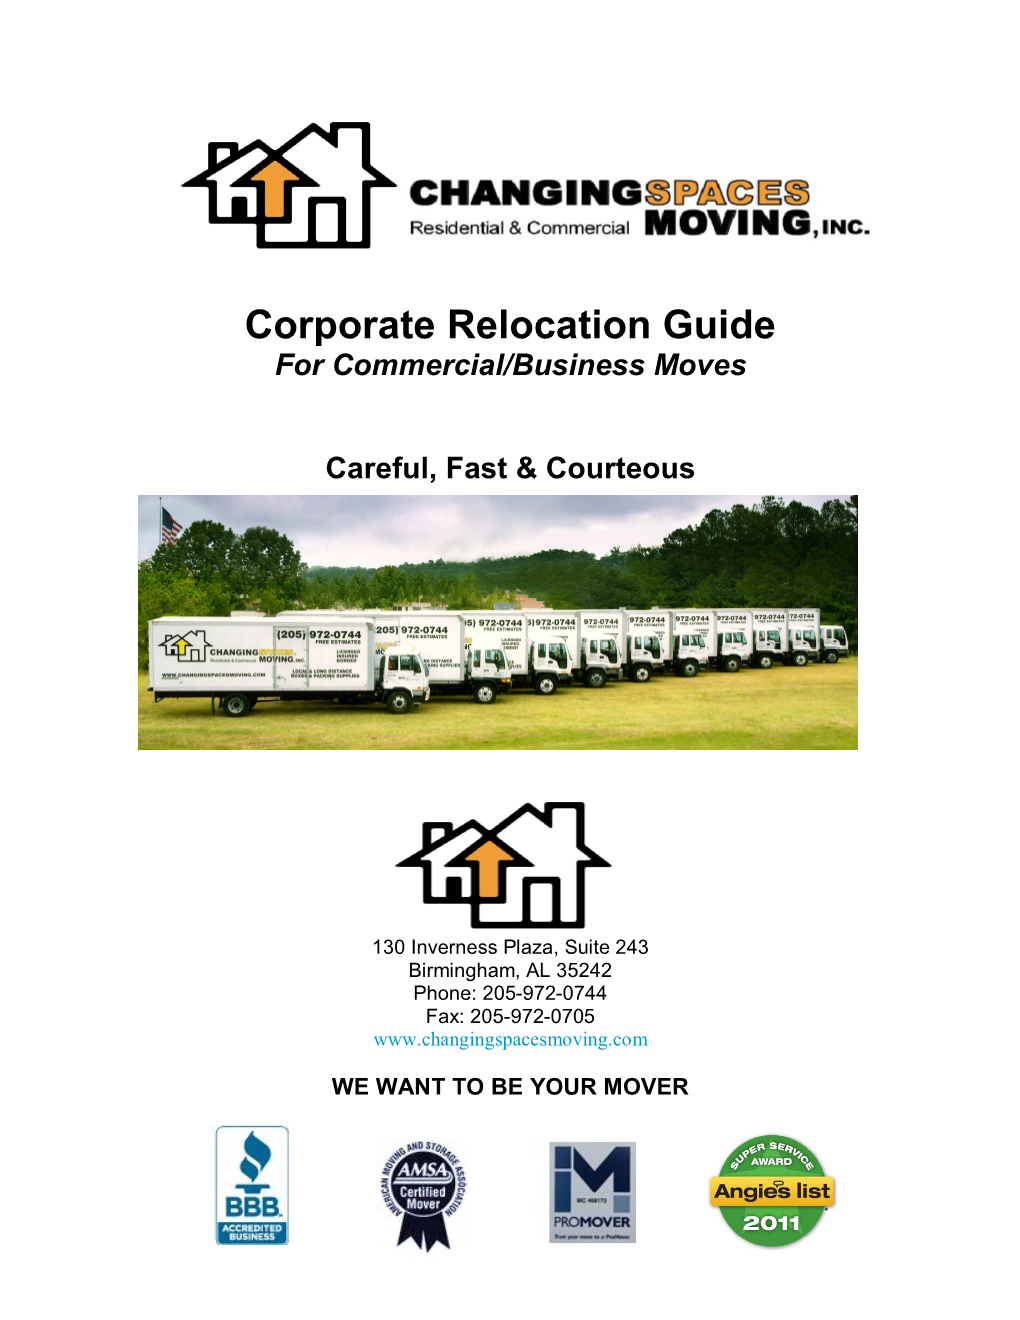 Corporate Relocation Guide for Commercial/Business Moves